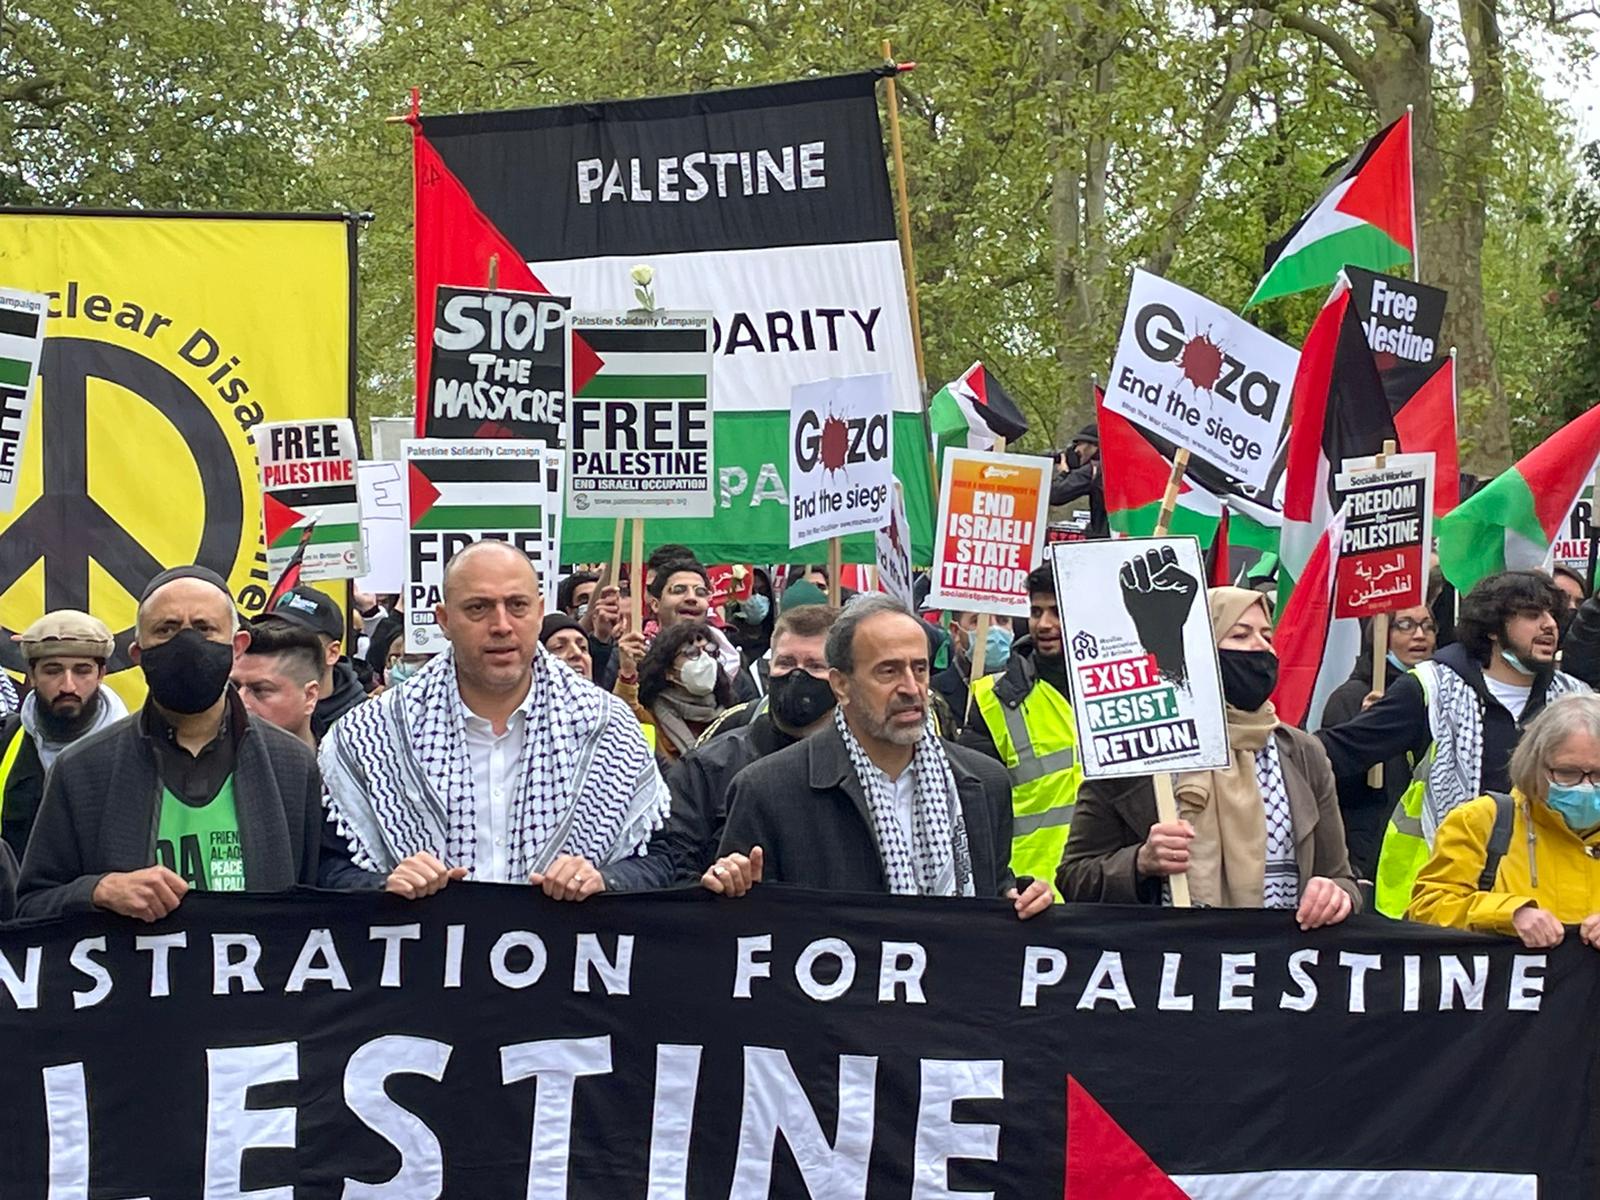 Nearly 150,000 demonstrators marched together in London on Saturday condemning Israel’s atrocities in Gaza [Middle East Monitor]